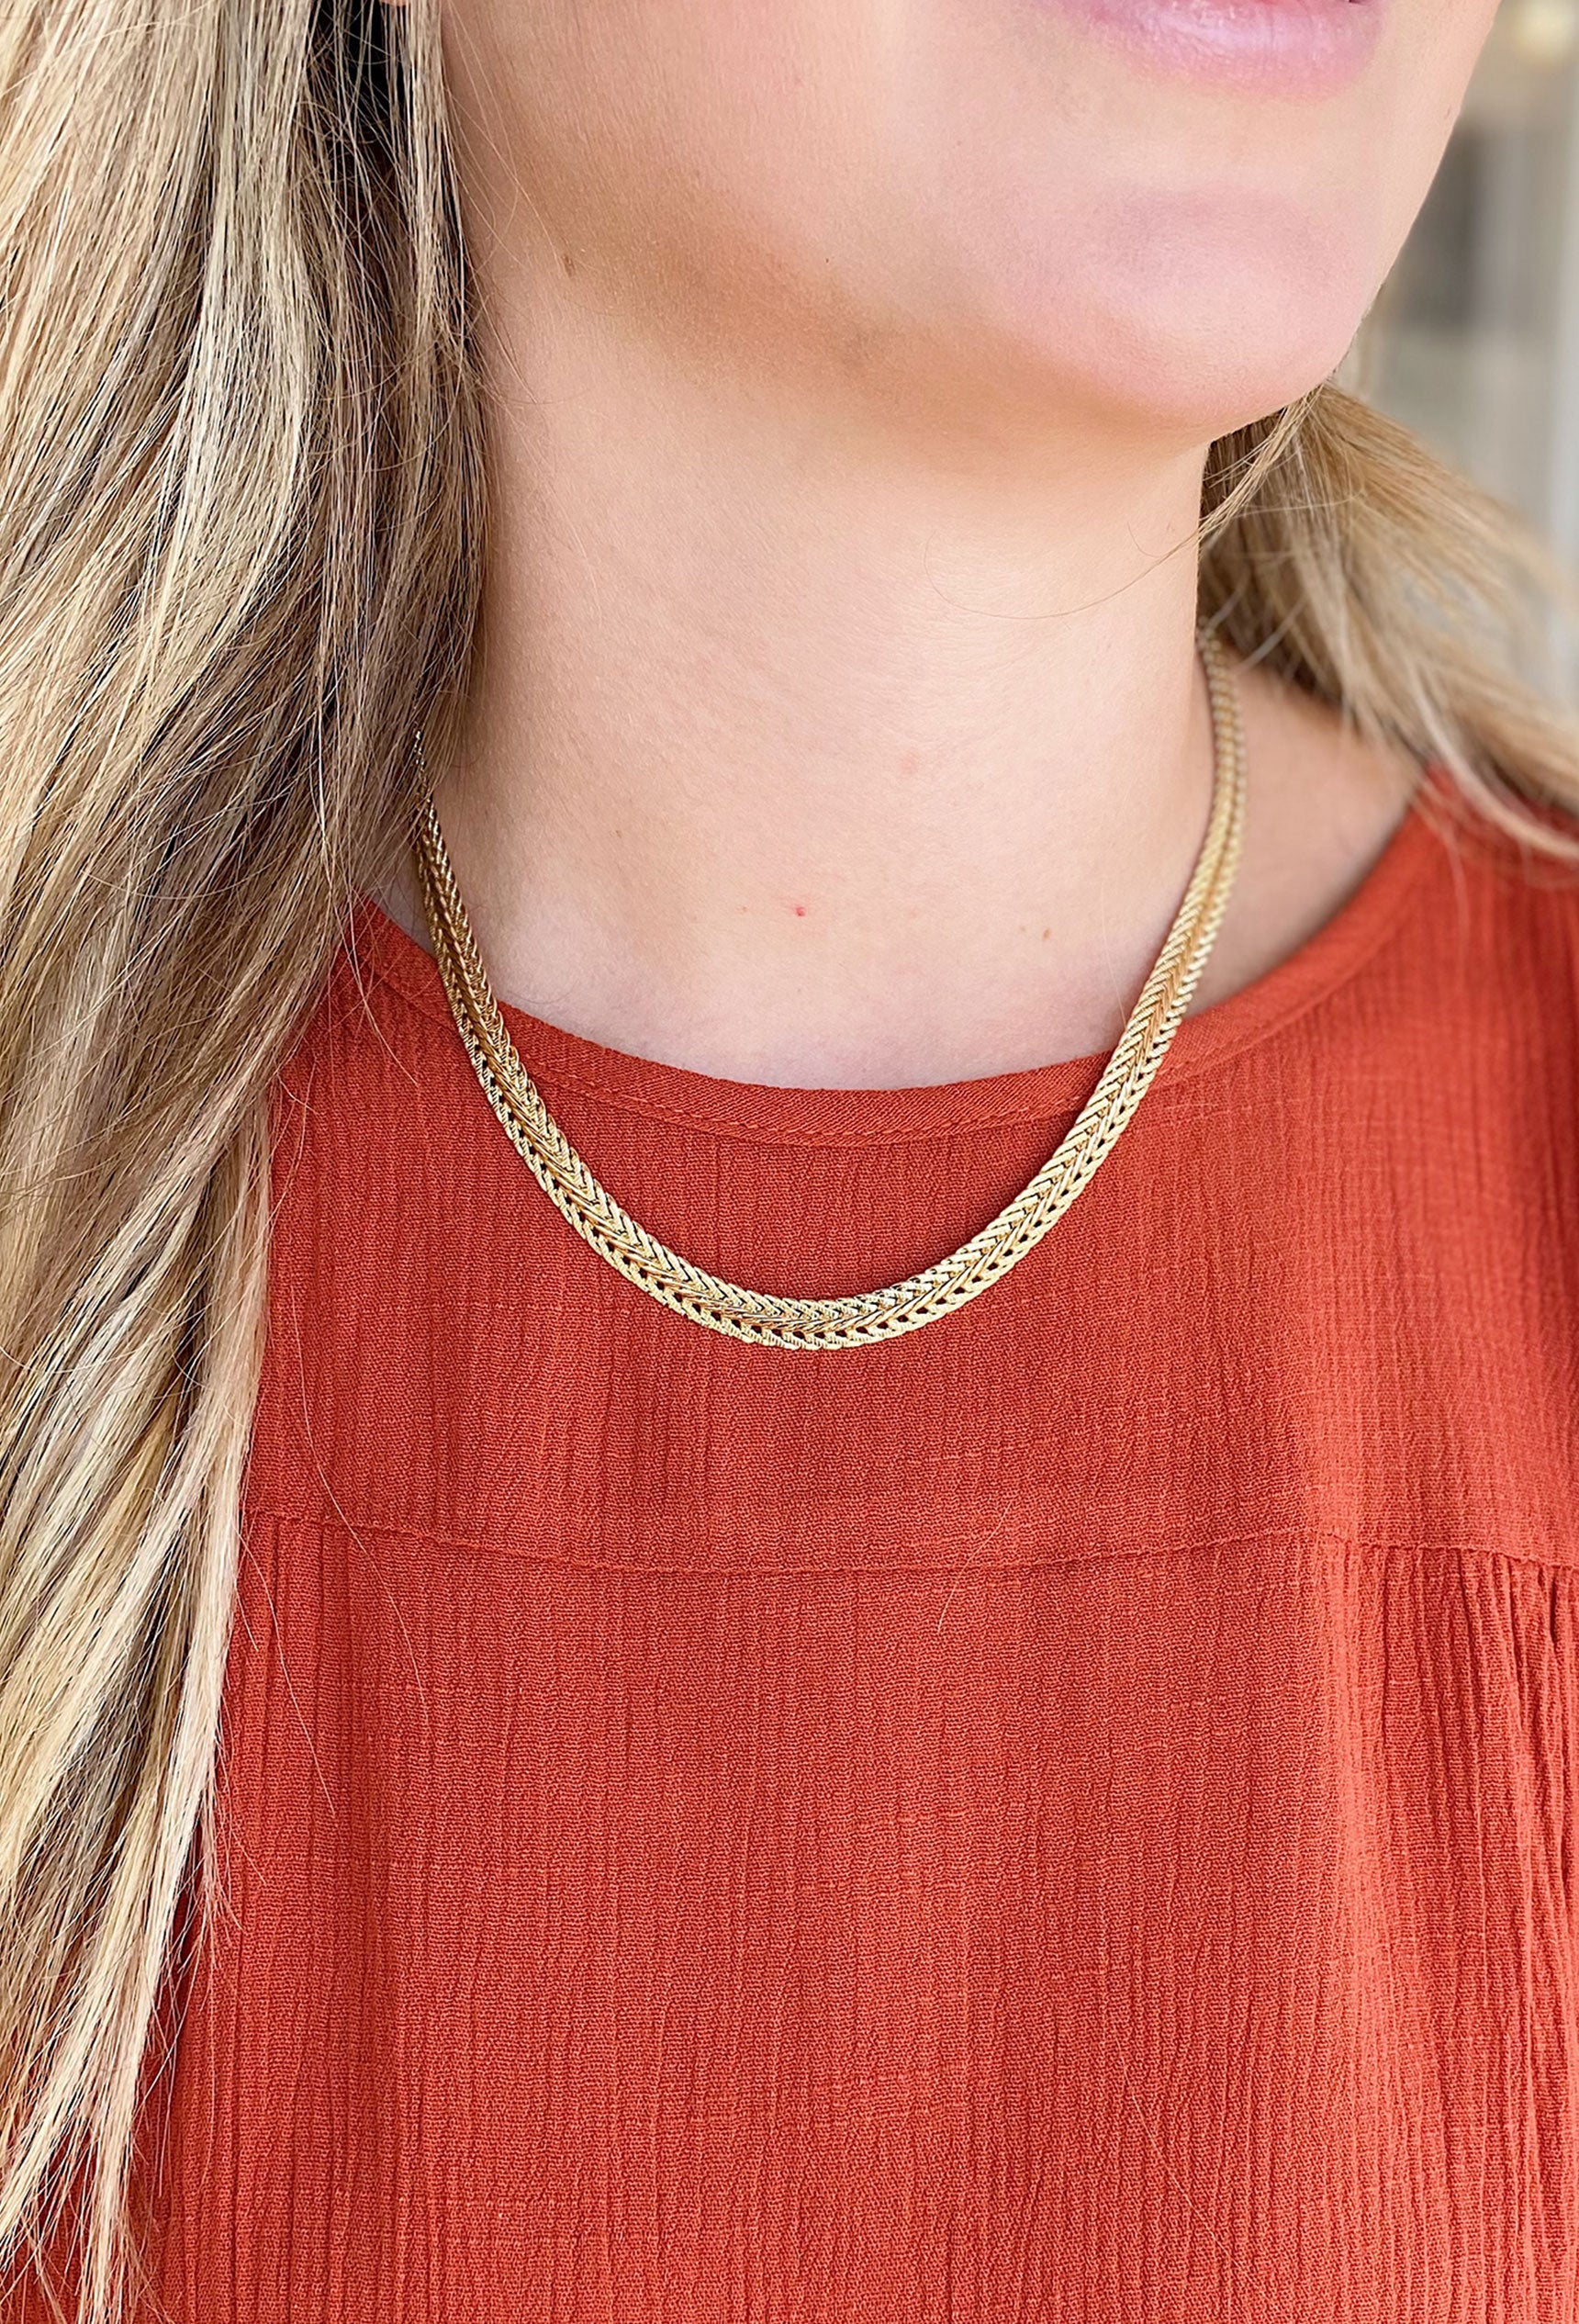 Enough Said Gold Chain Necklace, gold chain, thick, lobster clasp